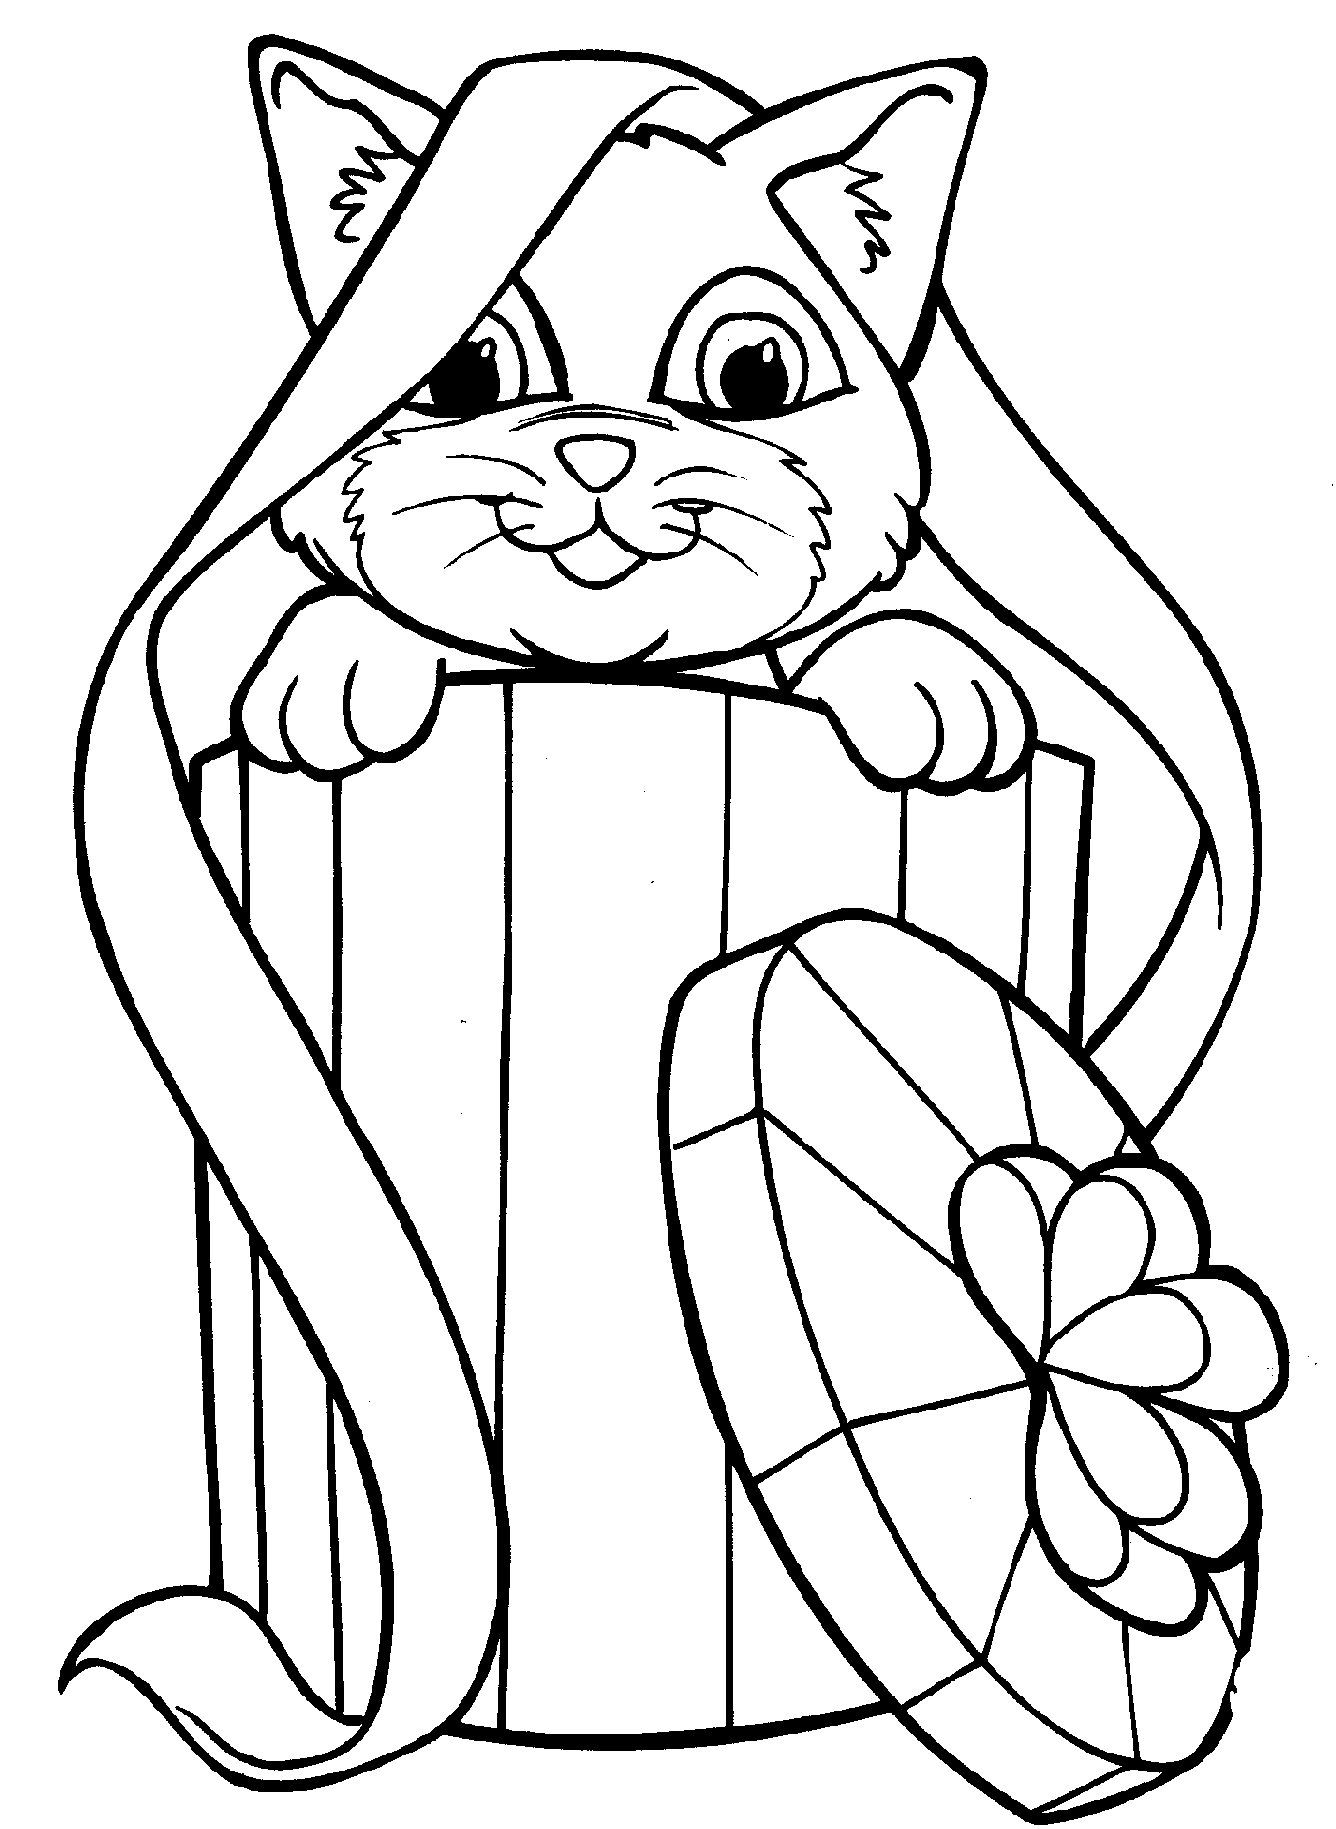 cute kitten pictures to print free printable kitten coloring pages for kids best to pictures cute print kitten 